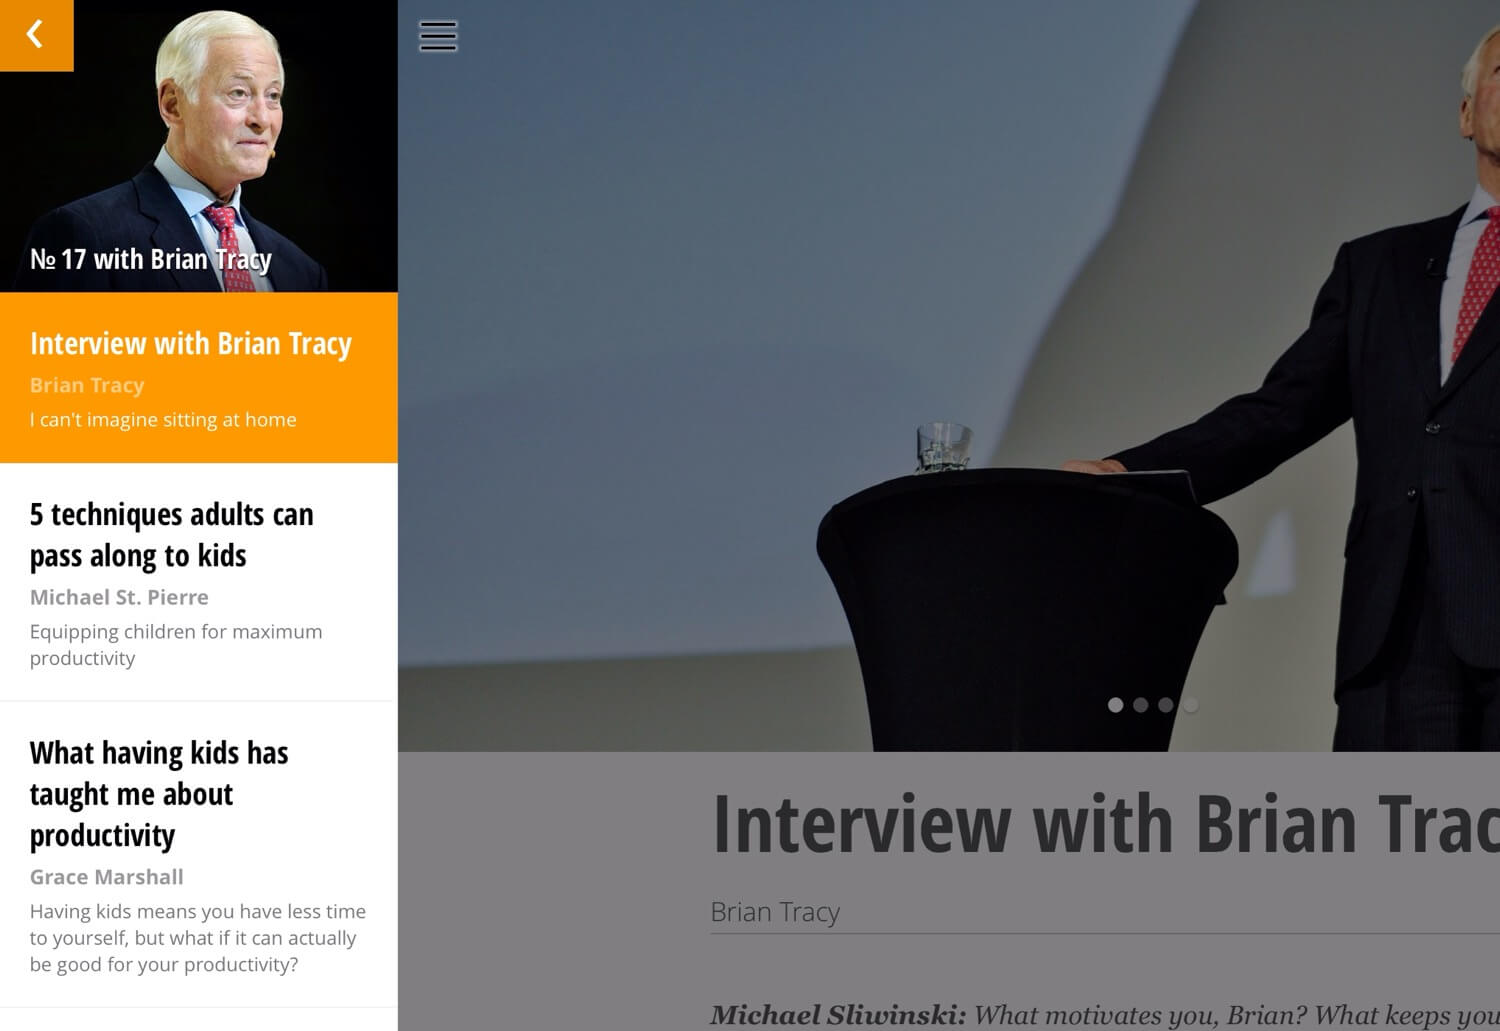 Productive! Magazine #17 with Brian Tracy is out! Enjoy!